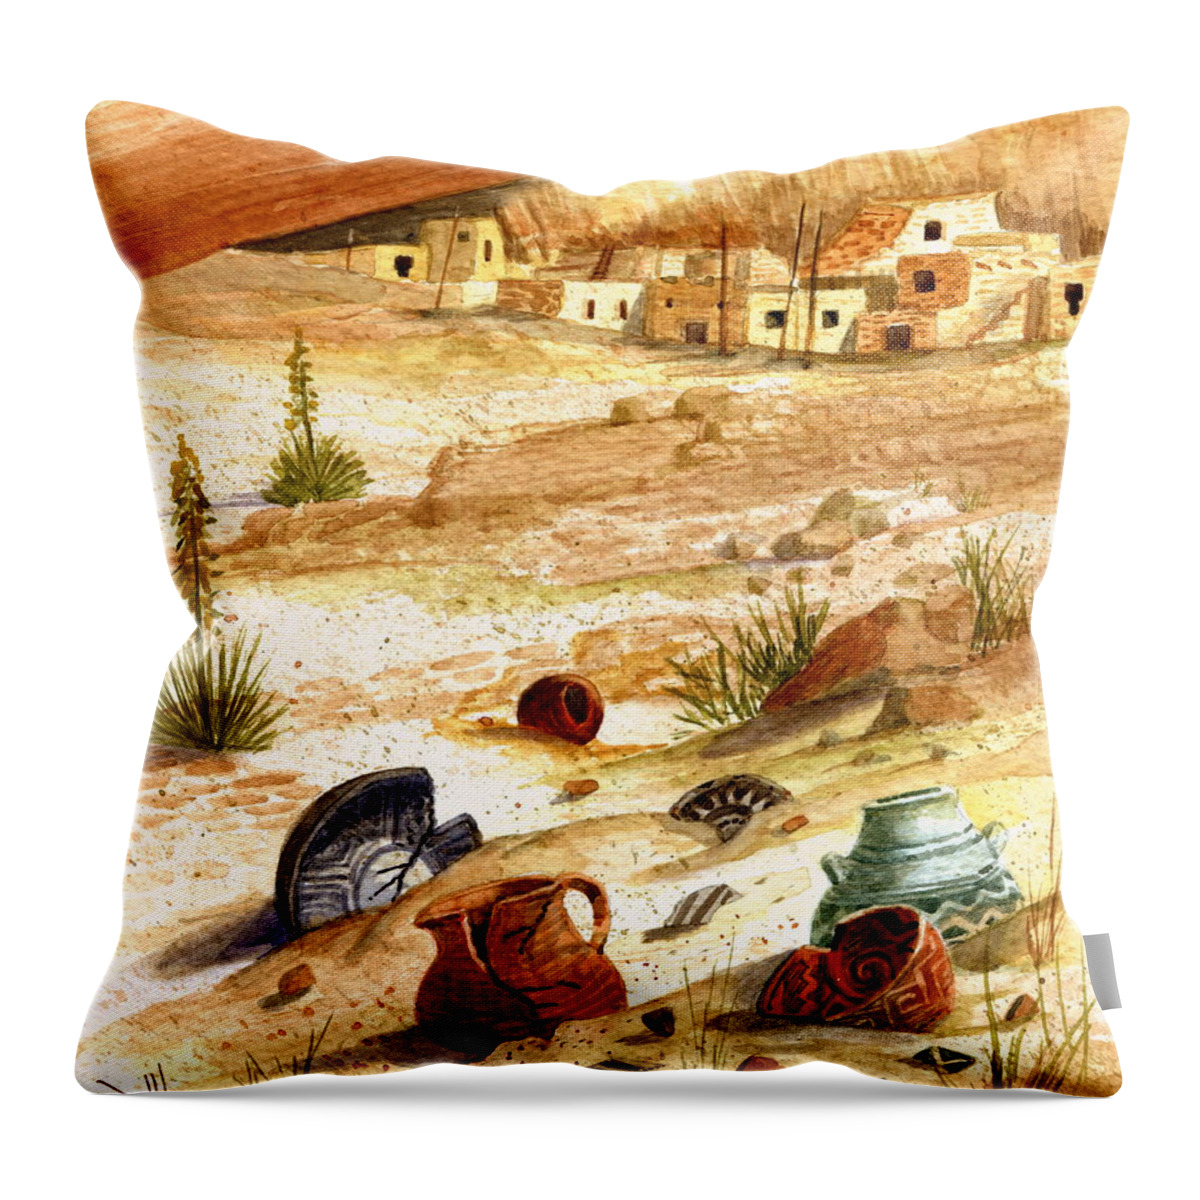 Anasazi Throw Pillow featuring the painting Left Behind - Indian Pottery by Marilyn Smith